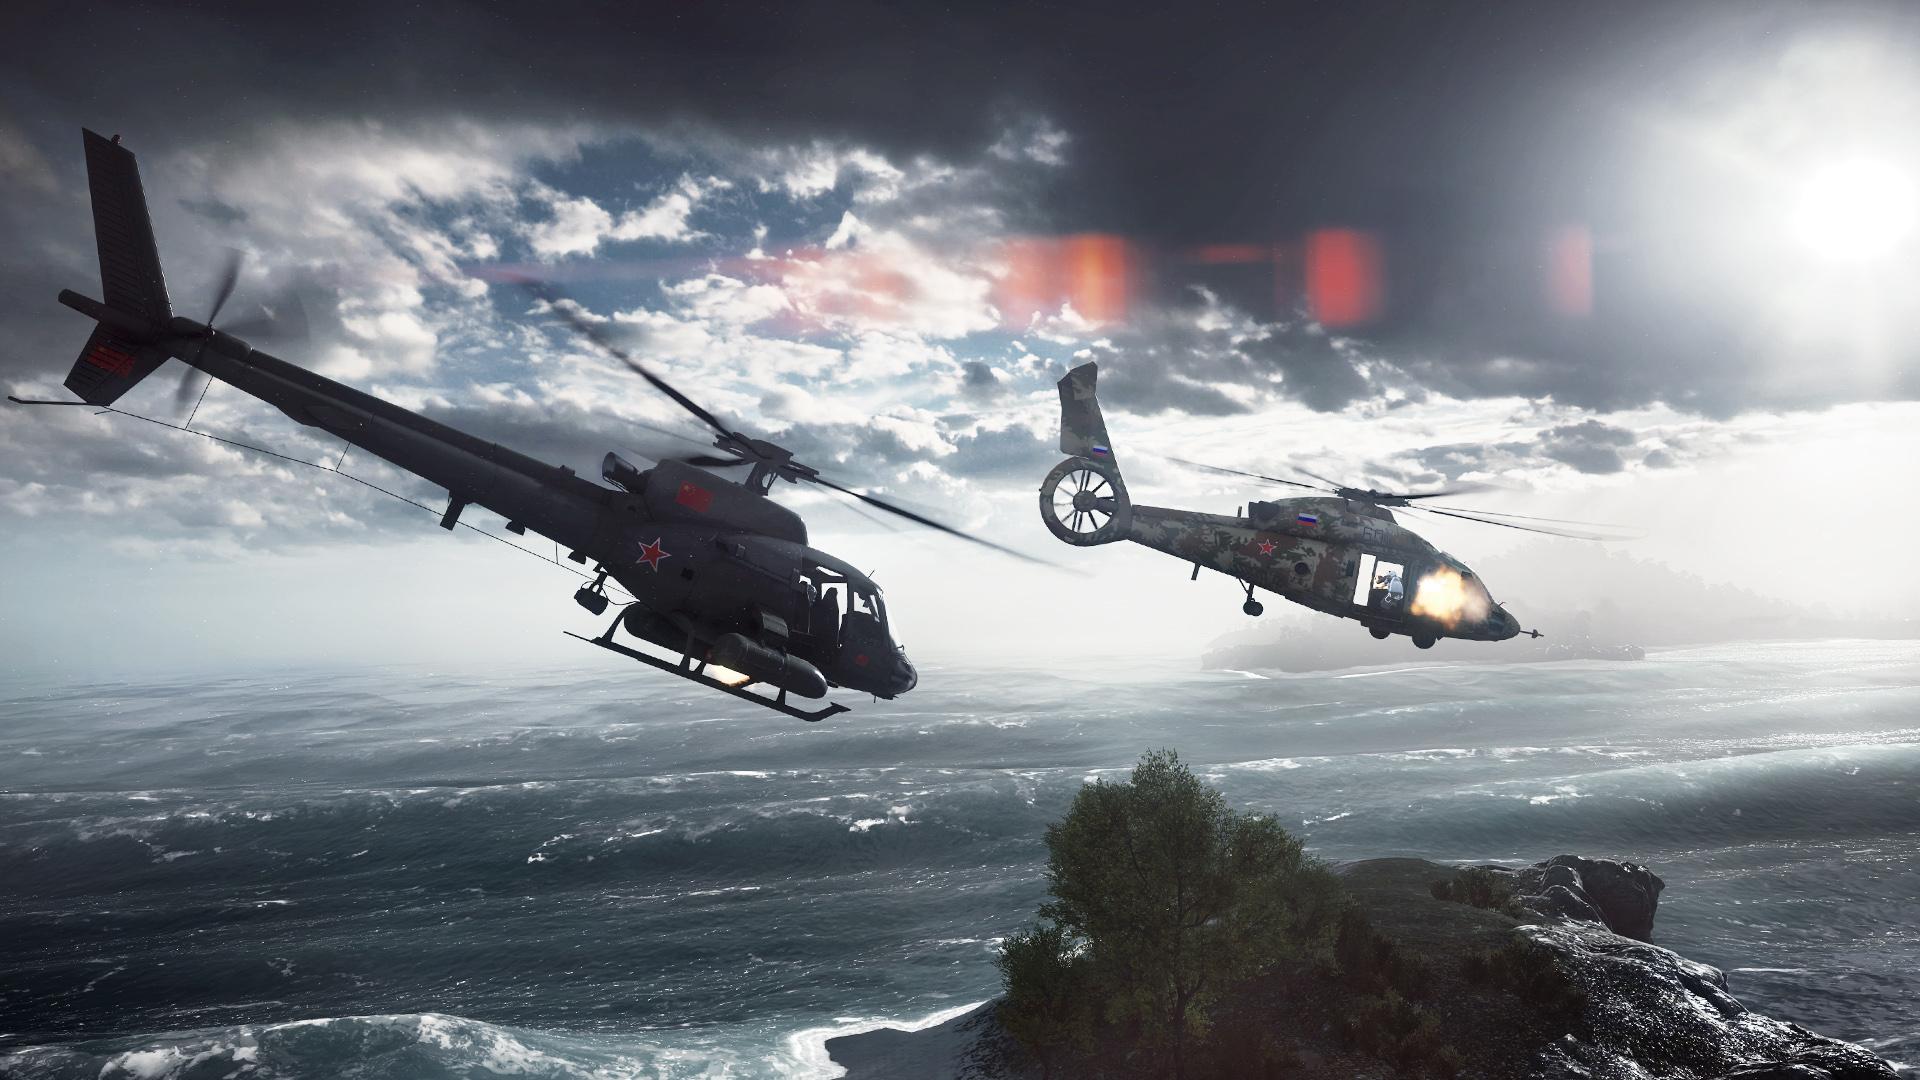 Battlefield 4 Premium comes with five expansions for $50 - Polygon